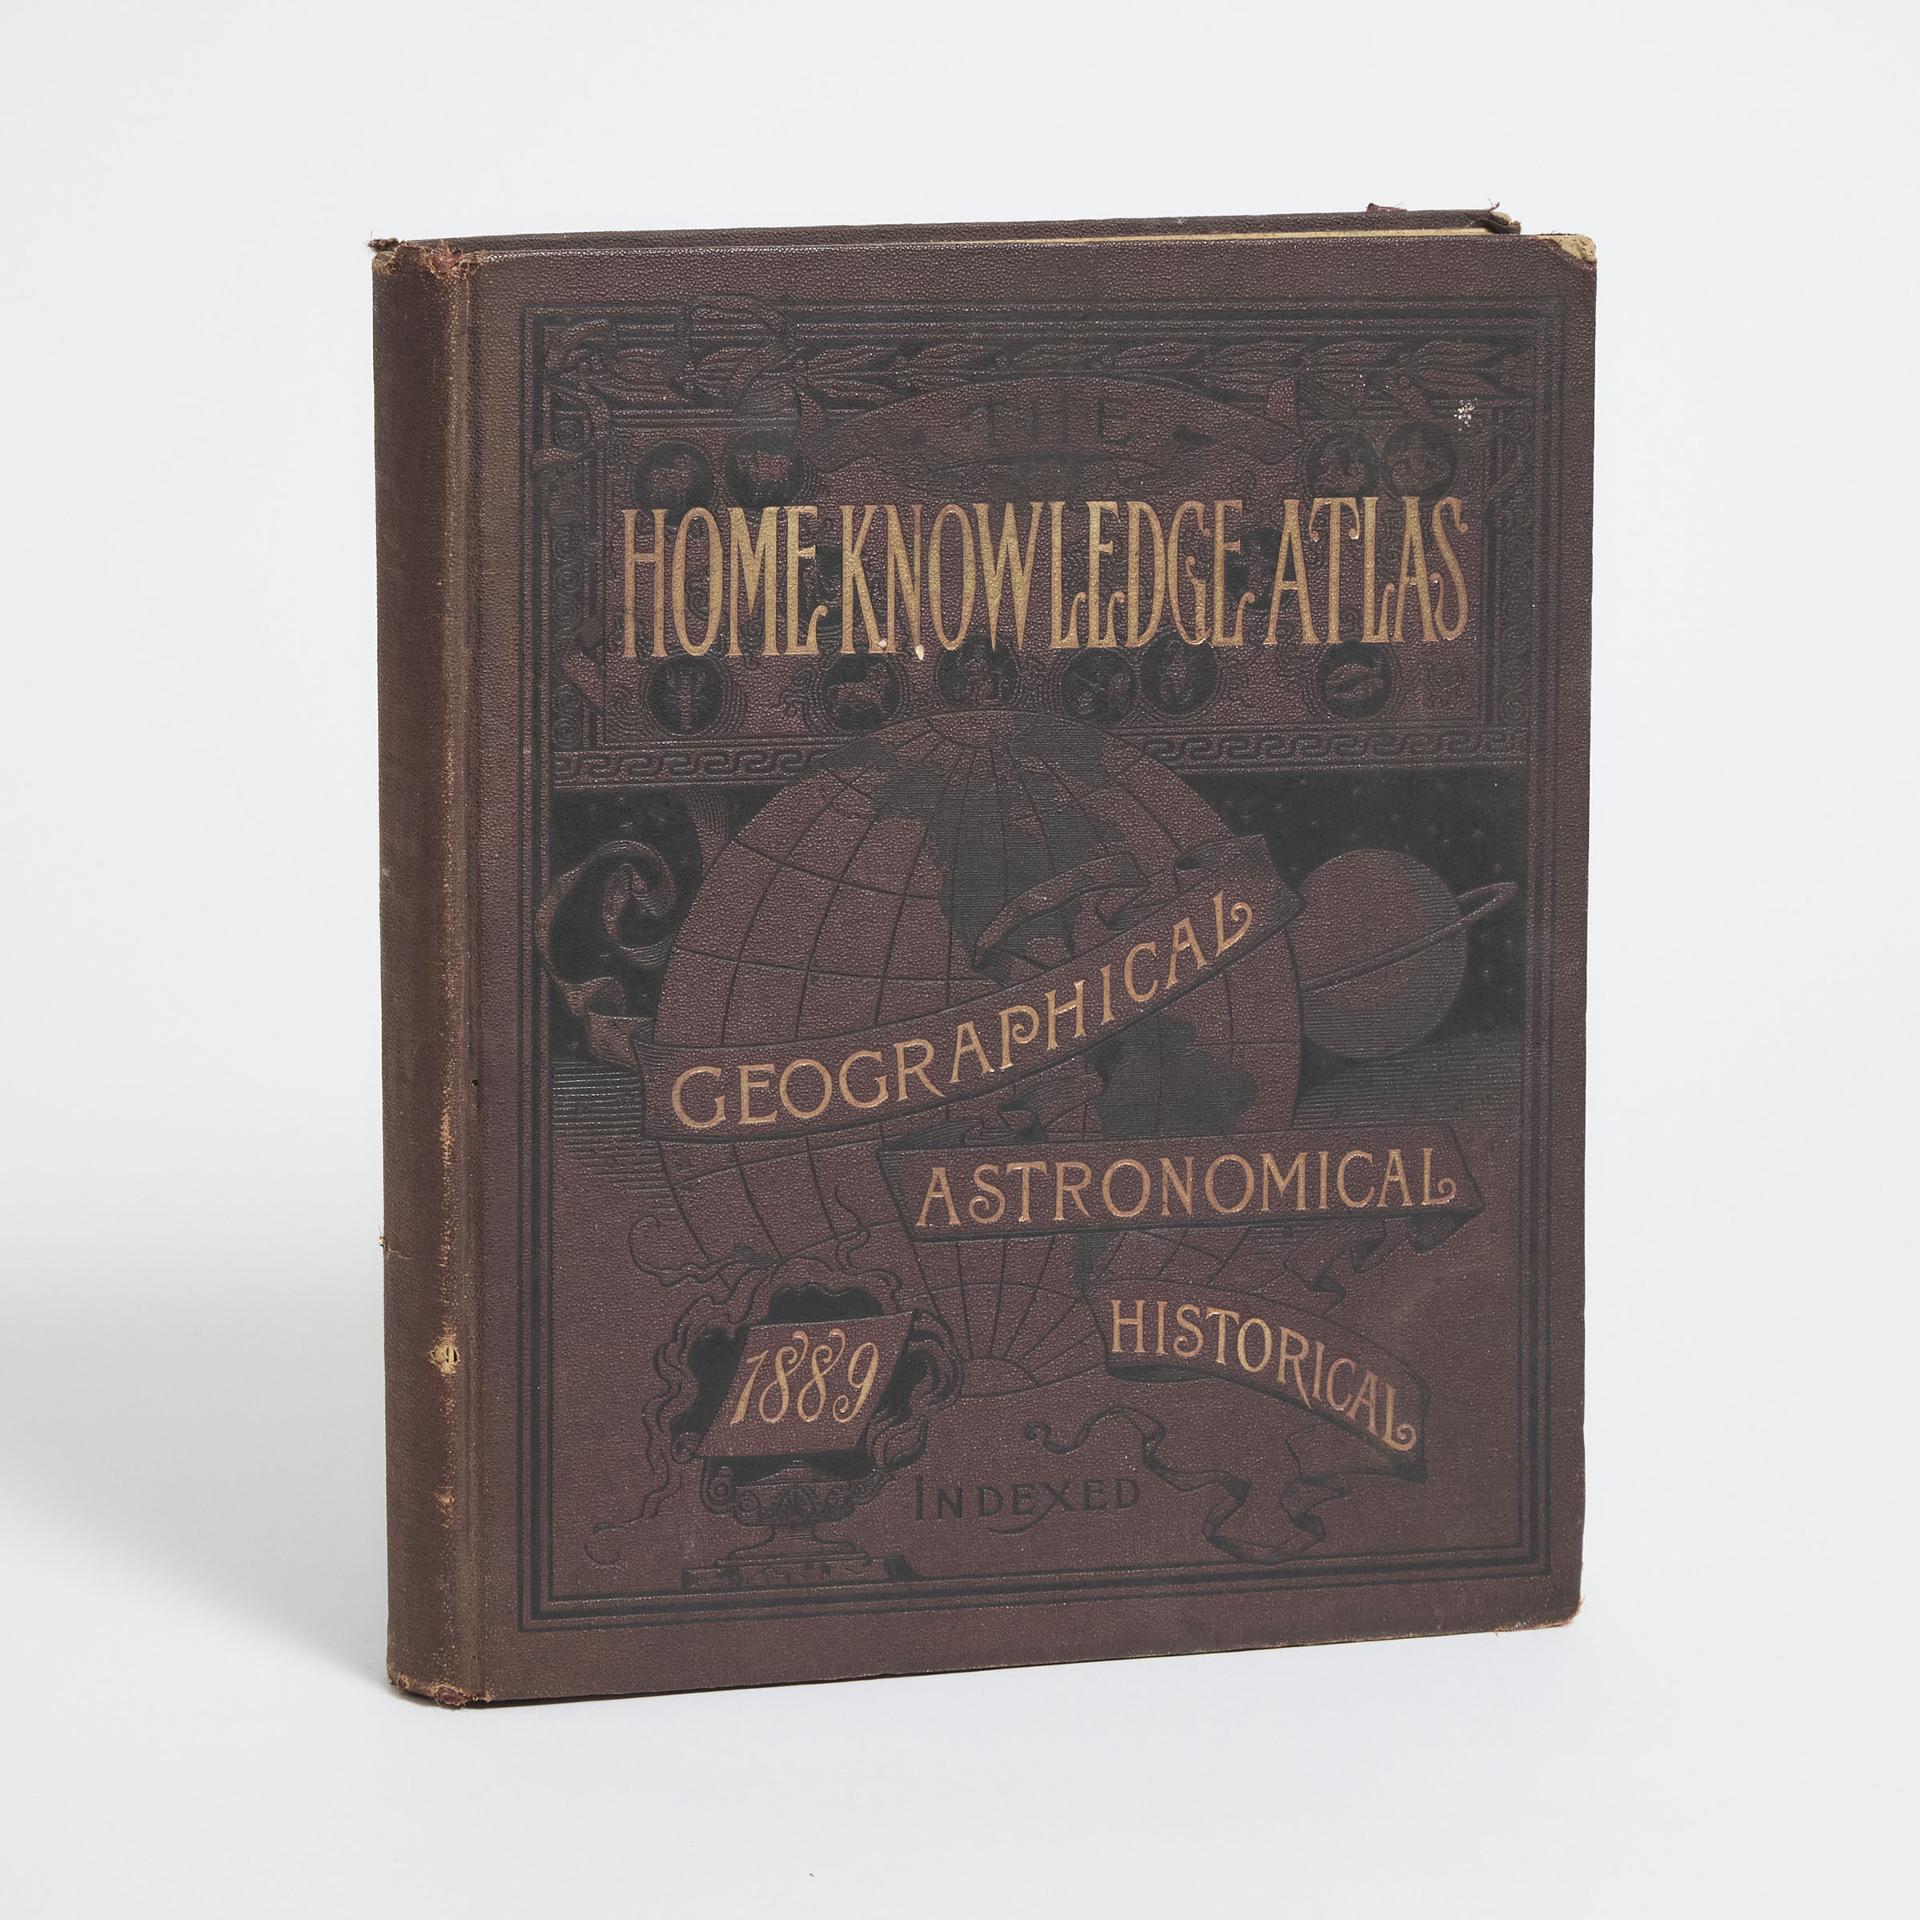 Toronto Home Knowledge Association - The Home Knowledge Geographical, Astronomical, Historical Atlas, 1889